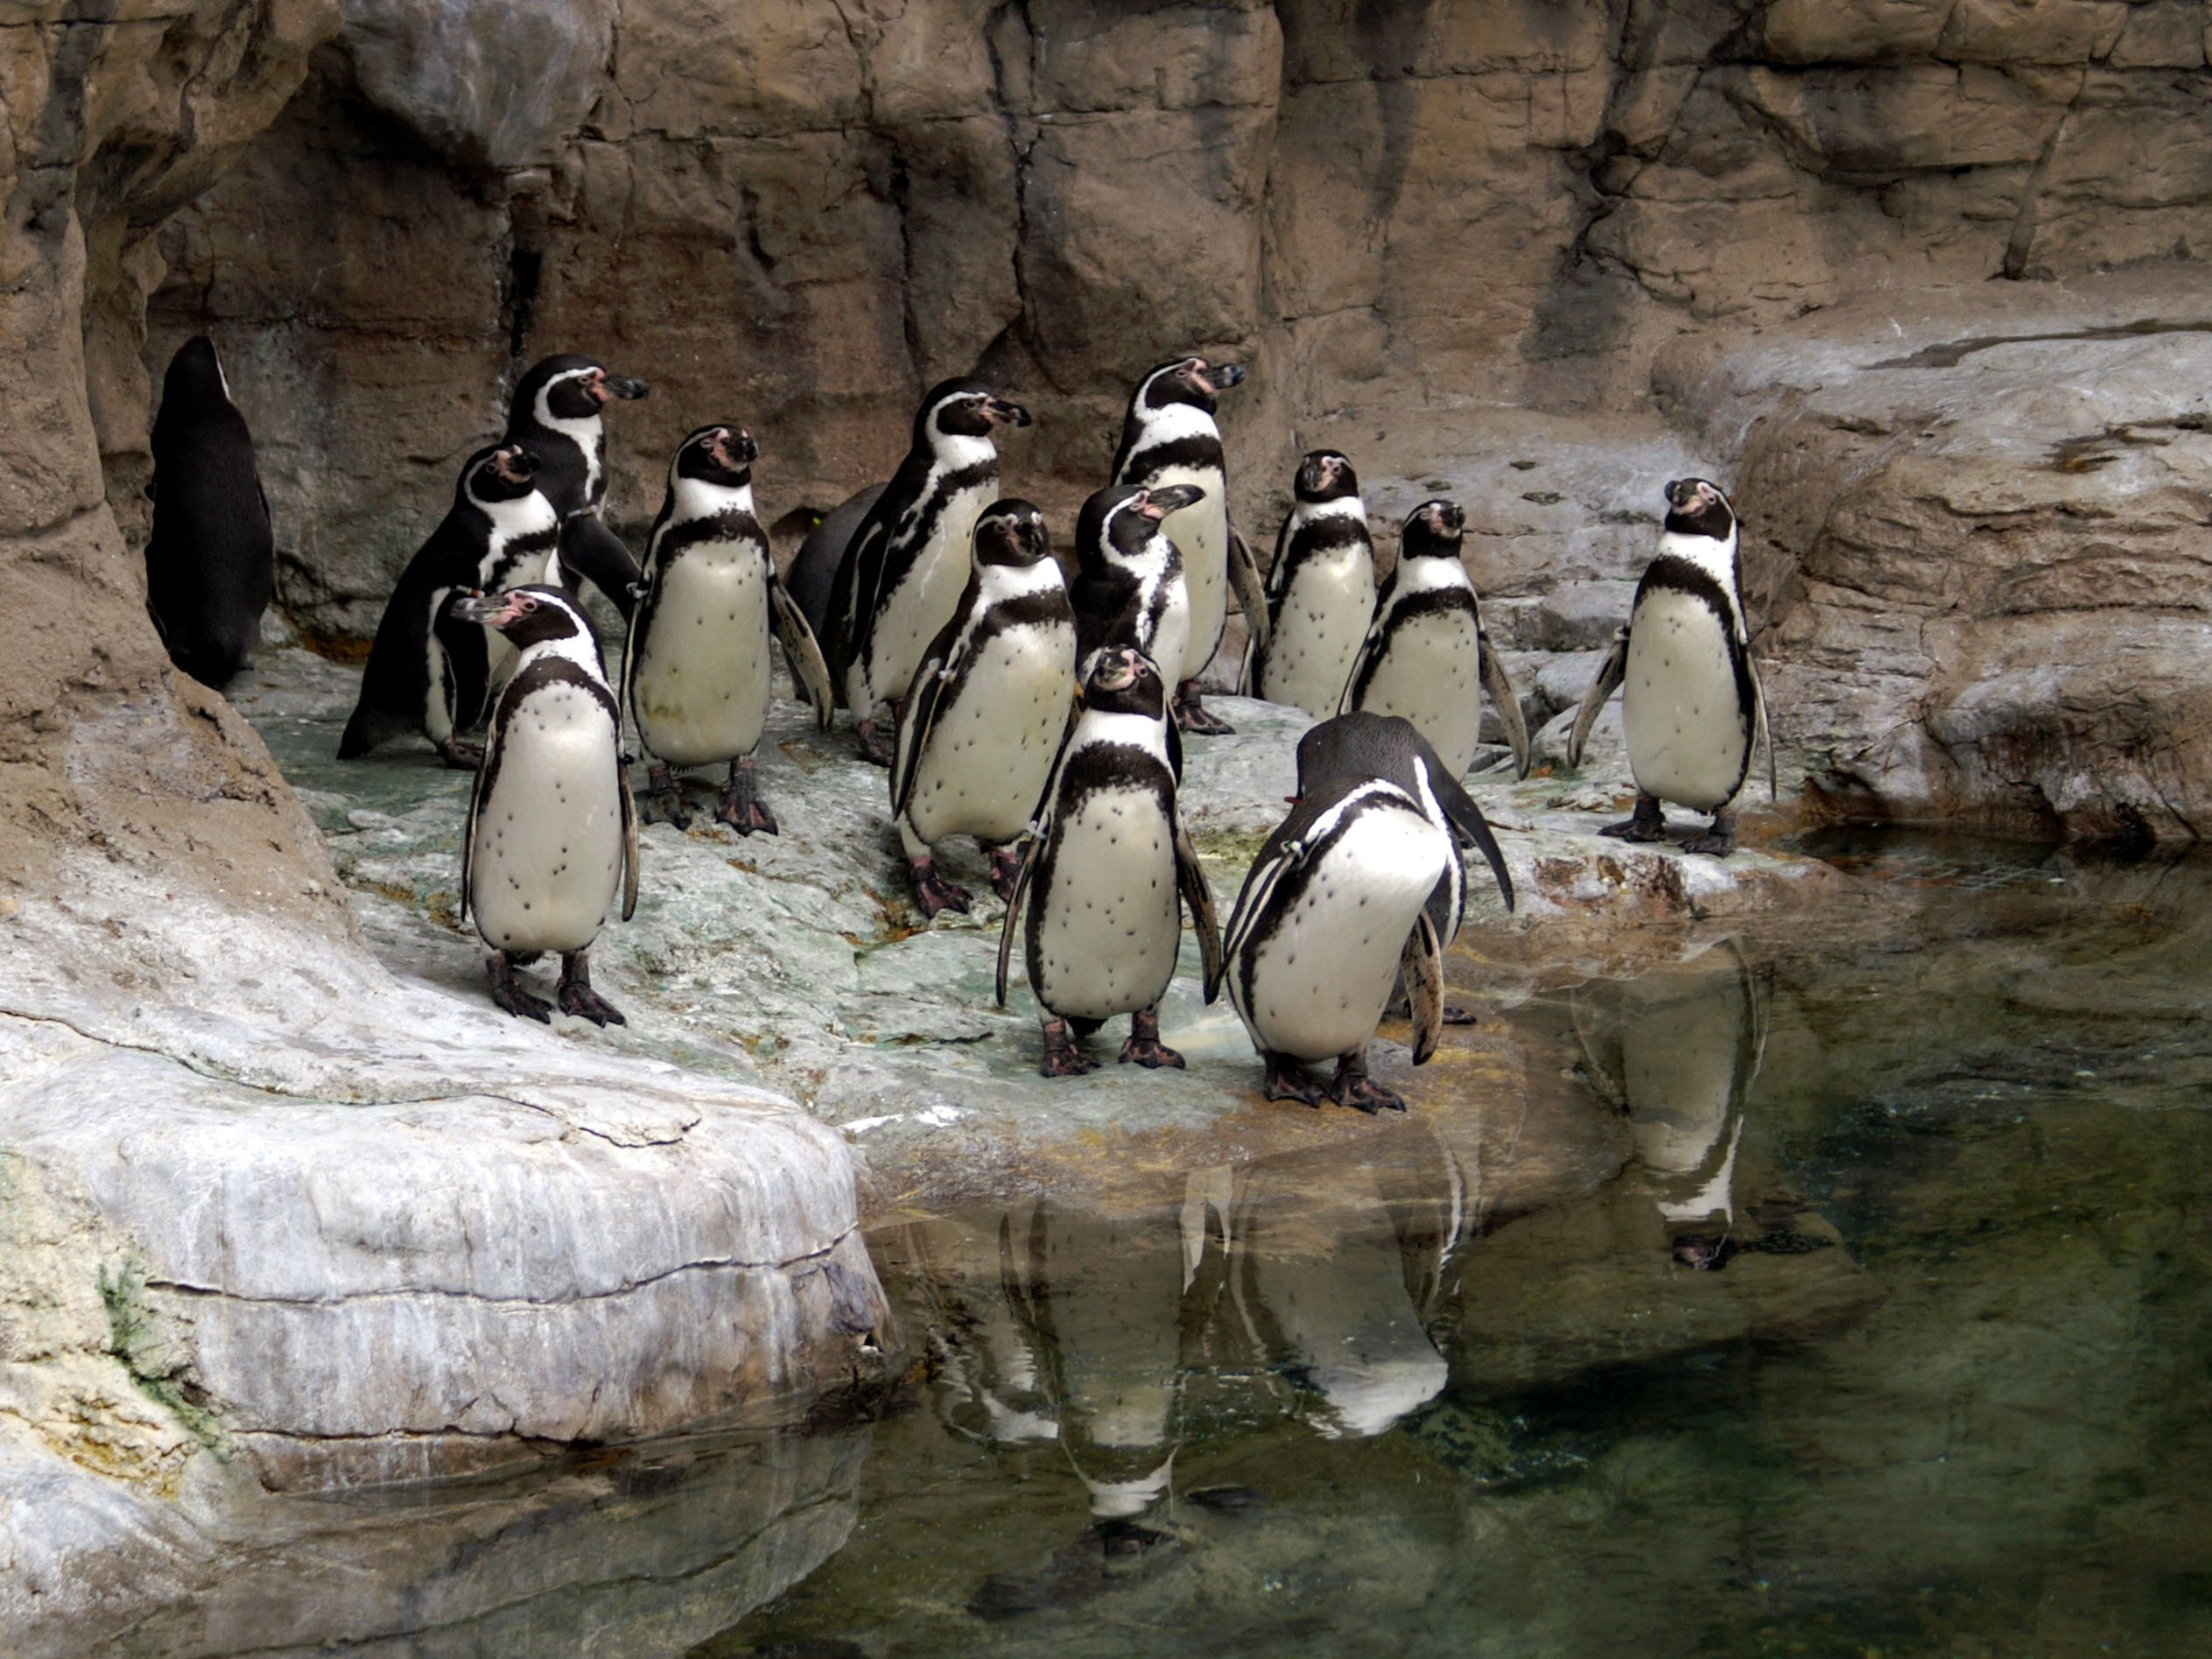 group of penguins at the st louis zoo 5aab5dbdff1b b4f20